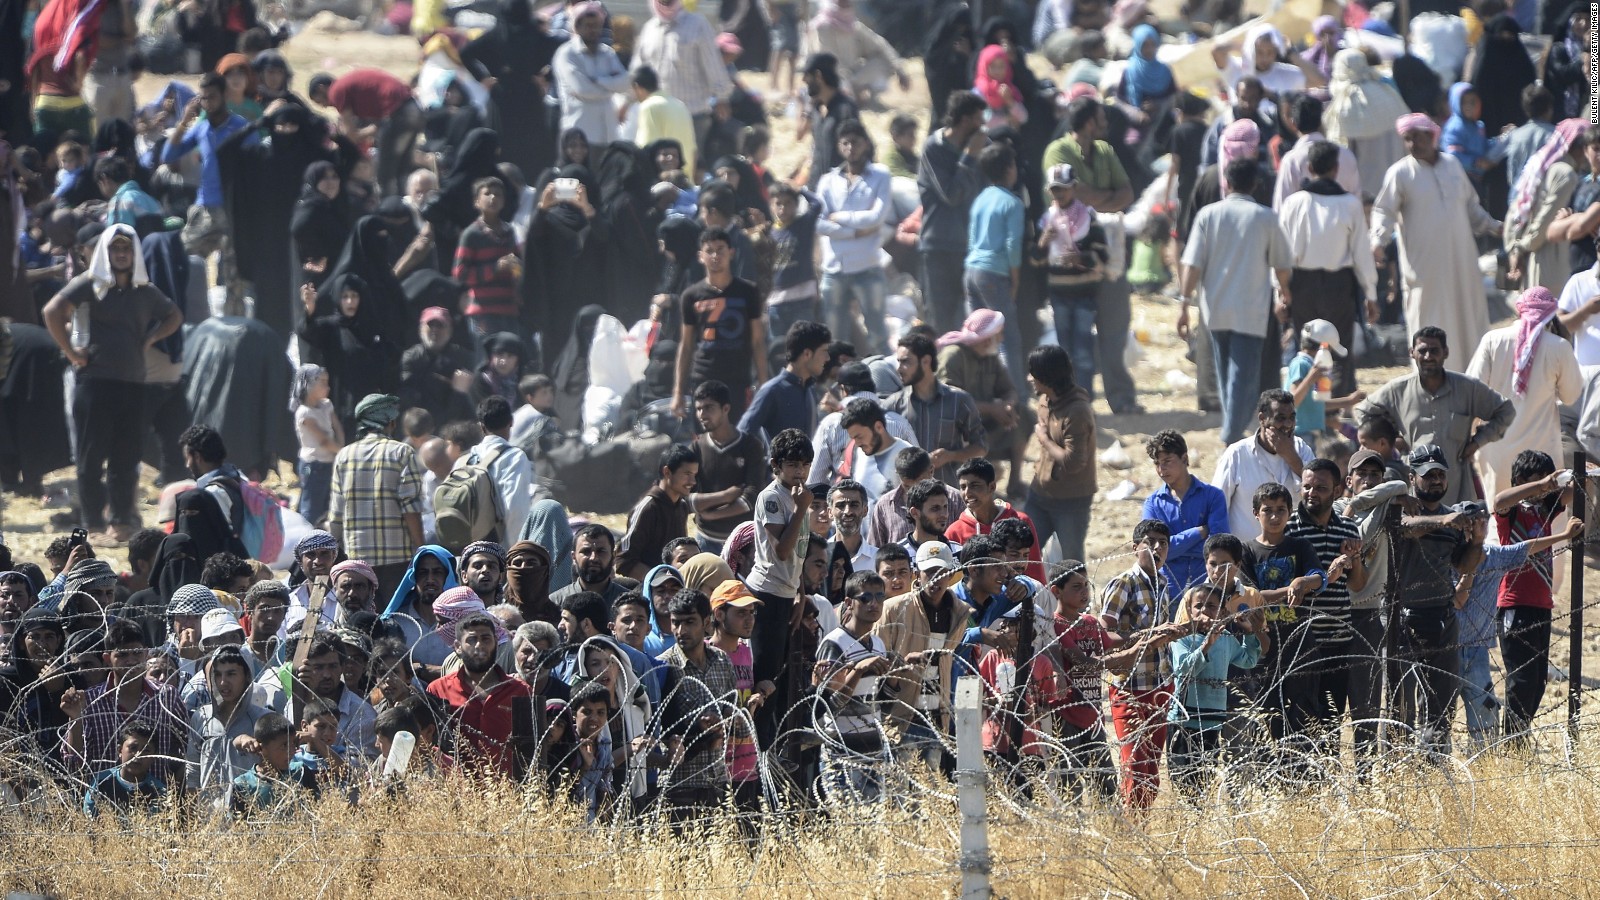 Us To Take At Least 10000 More Syrian Refugees Cnnpolitics